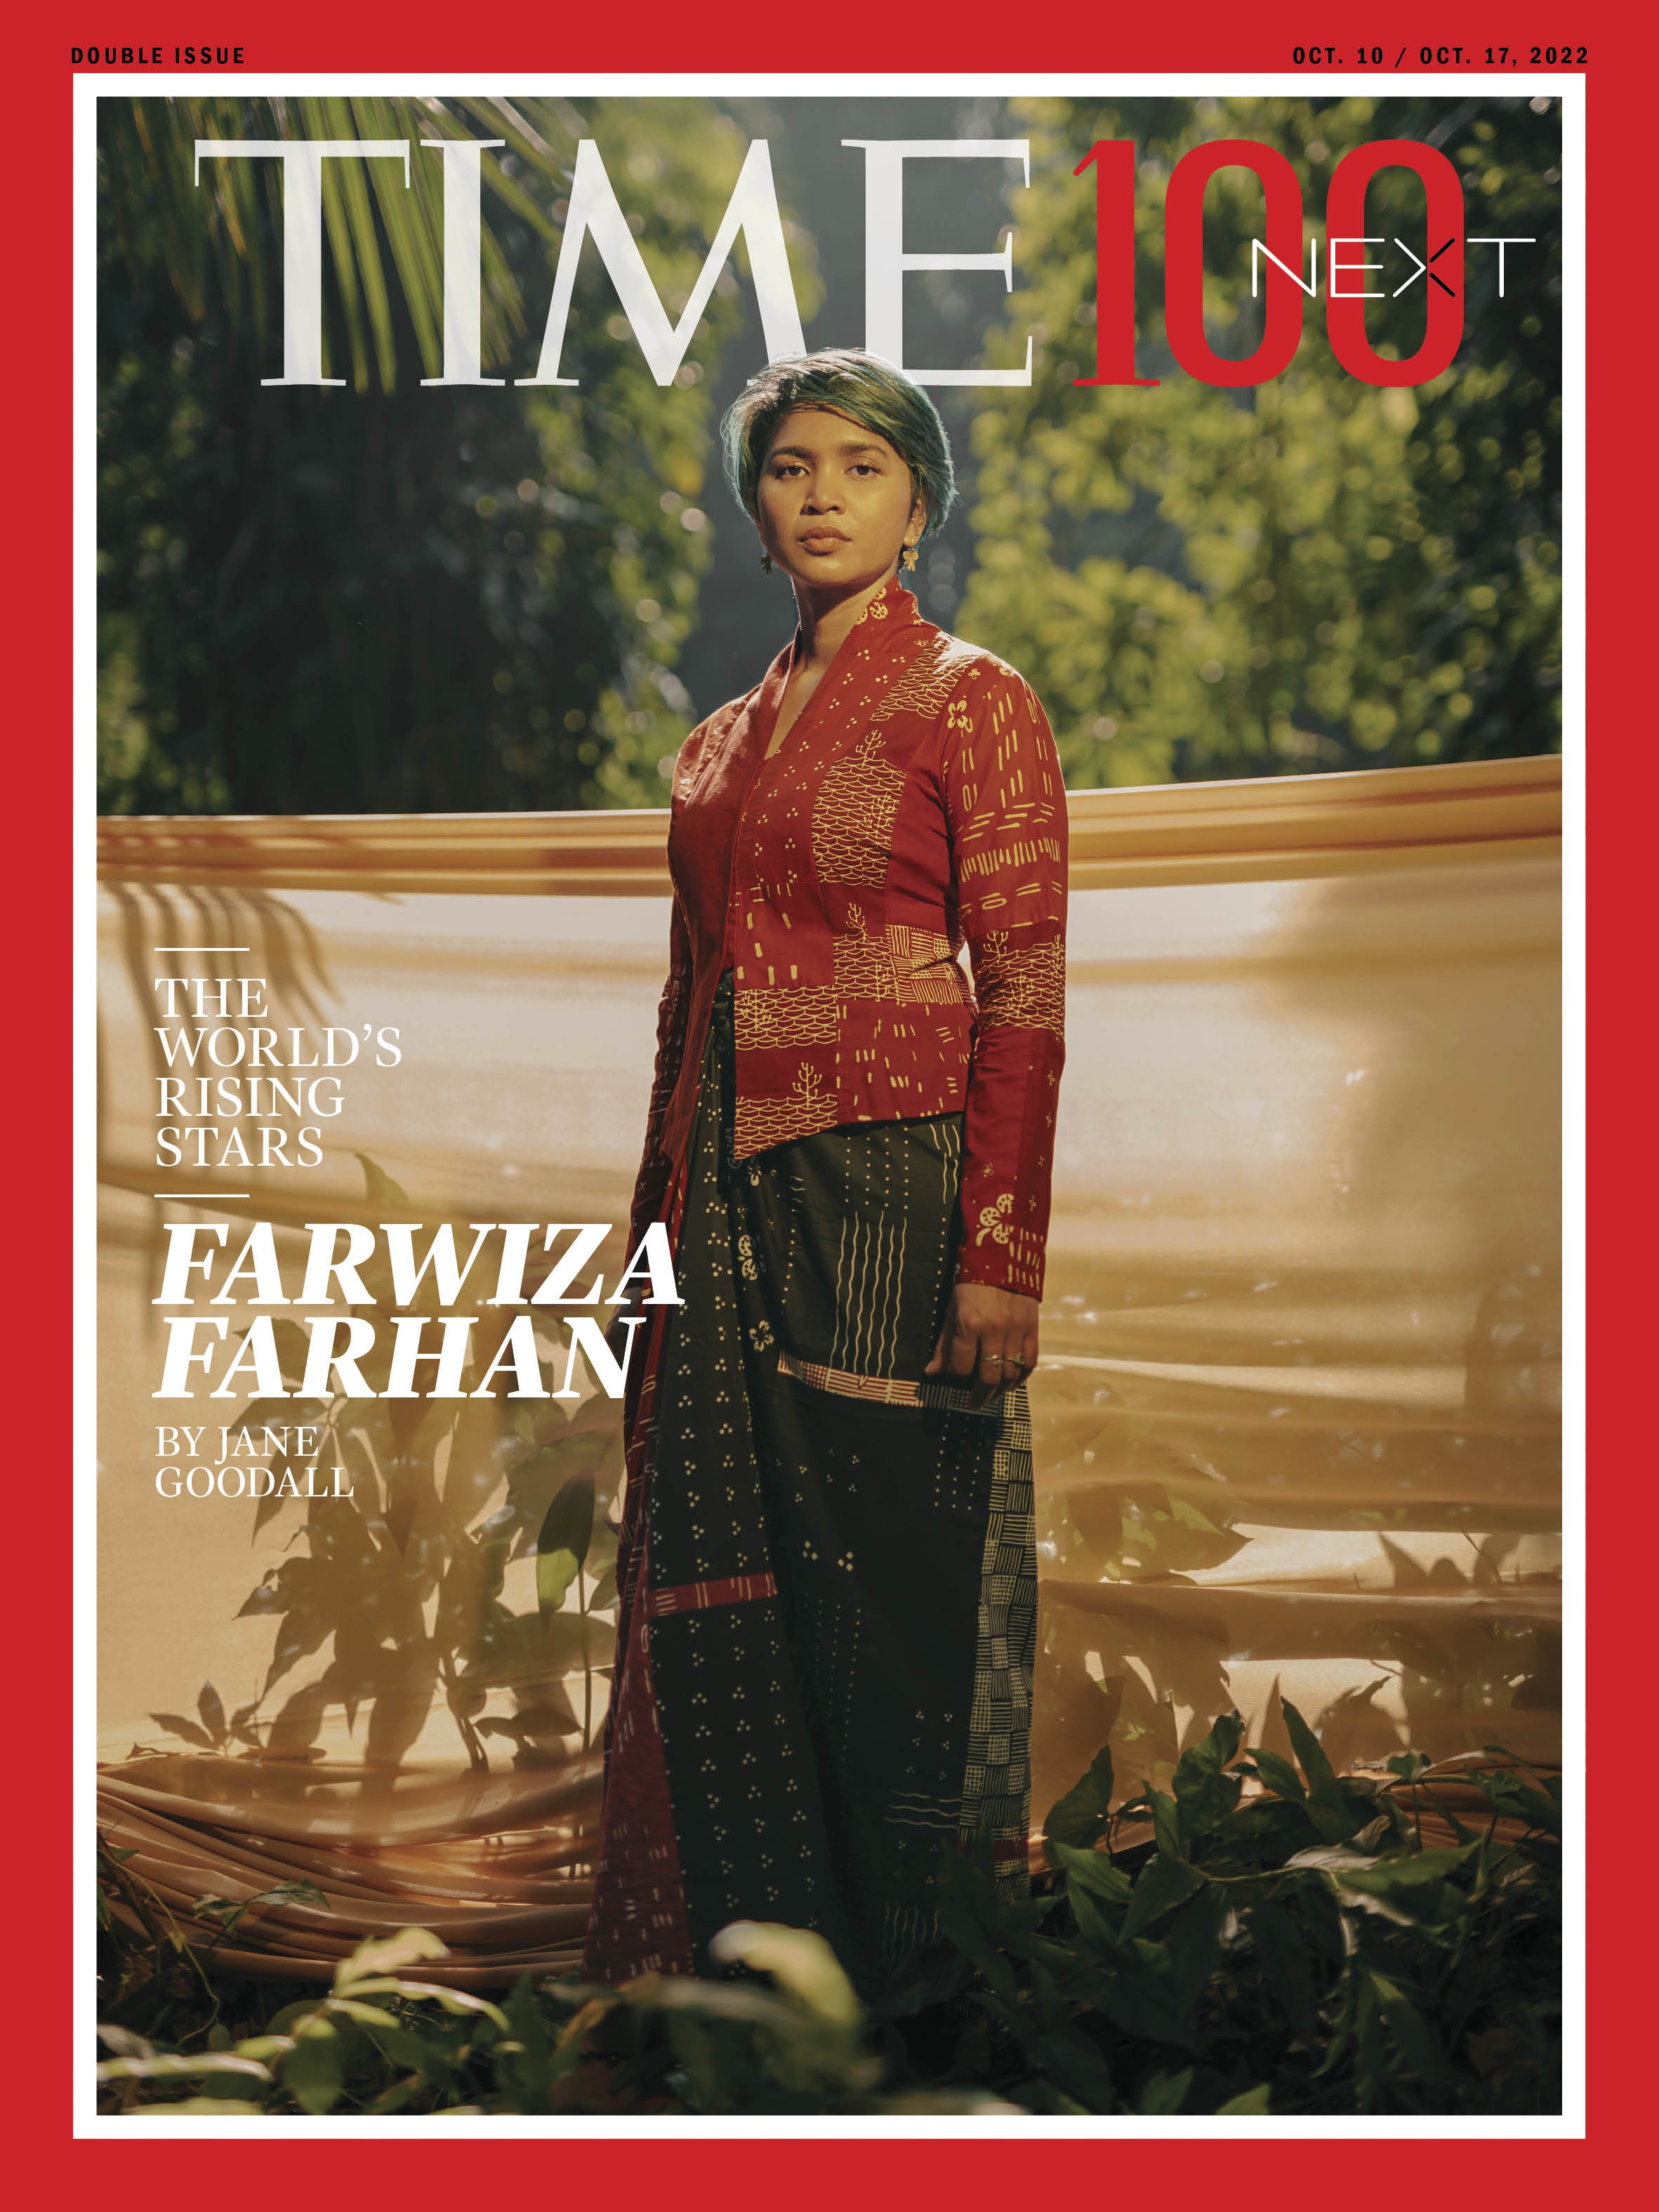  Farwiza Farhan on the cover of Time, Time 100Next Issue, October 2022 